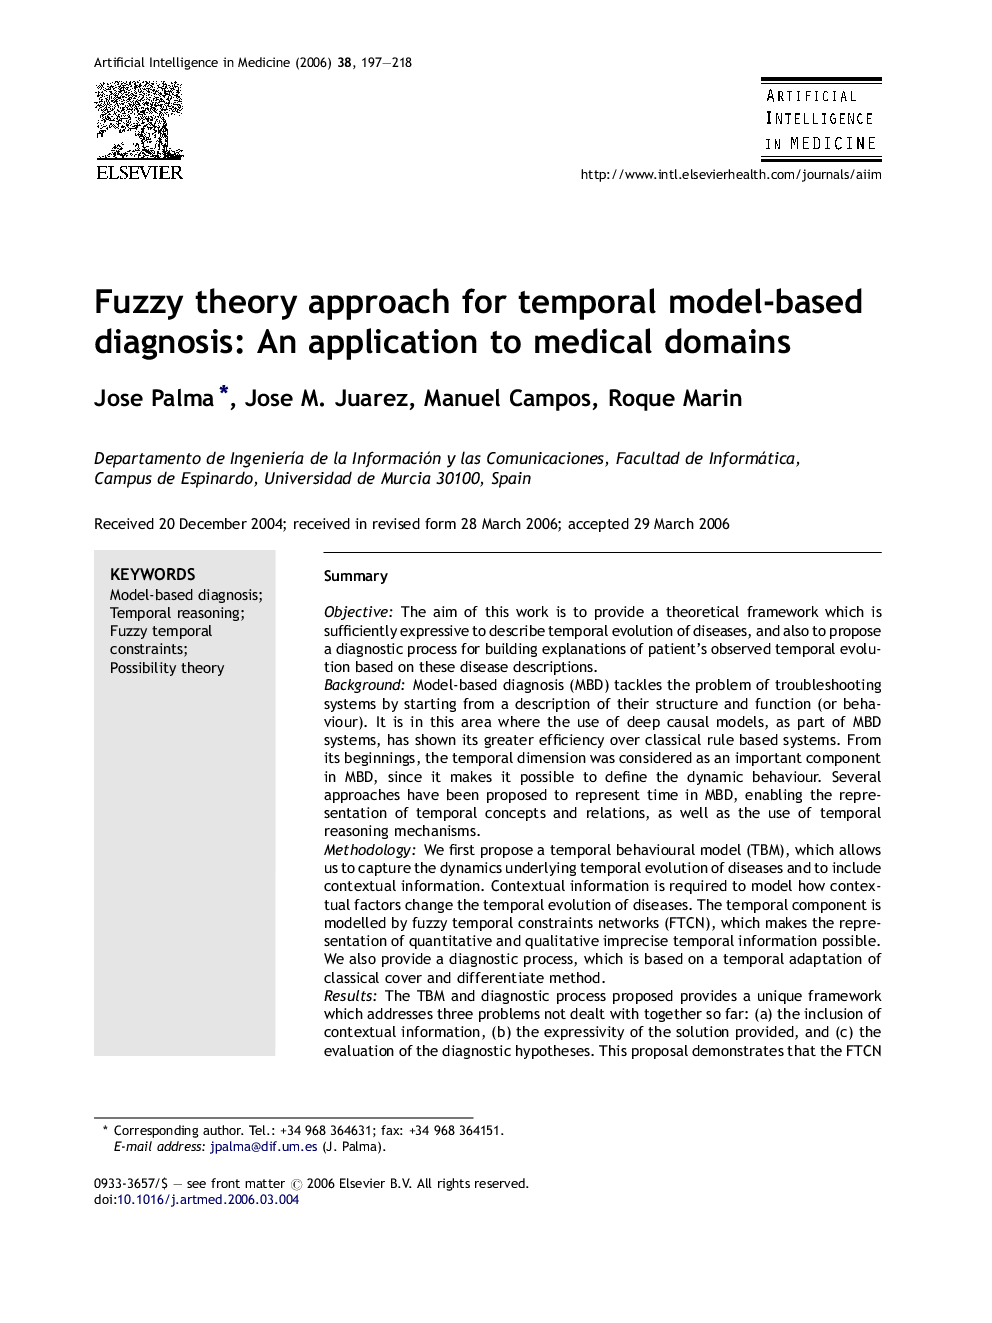 Fuzzy theory approach for temporal model-based diagnosis: An application to medical domains